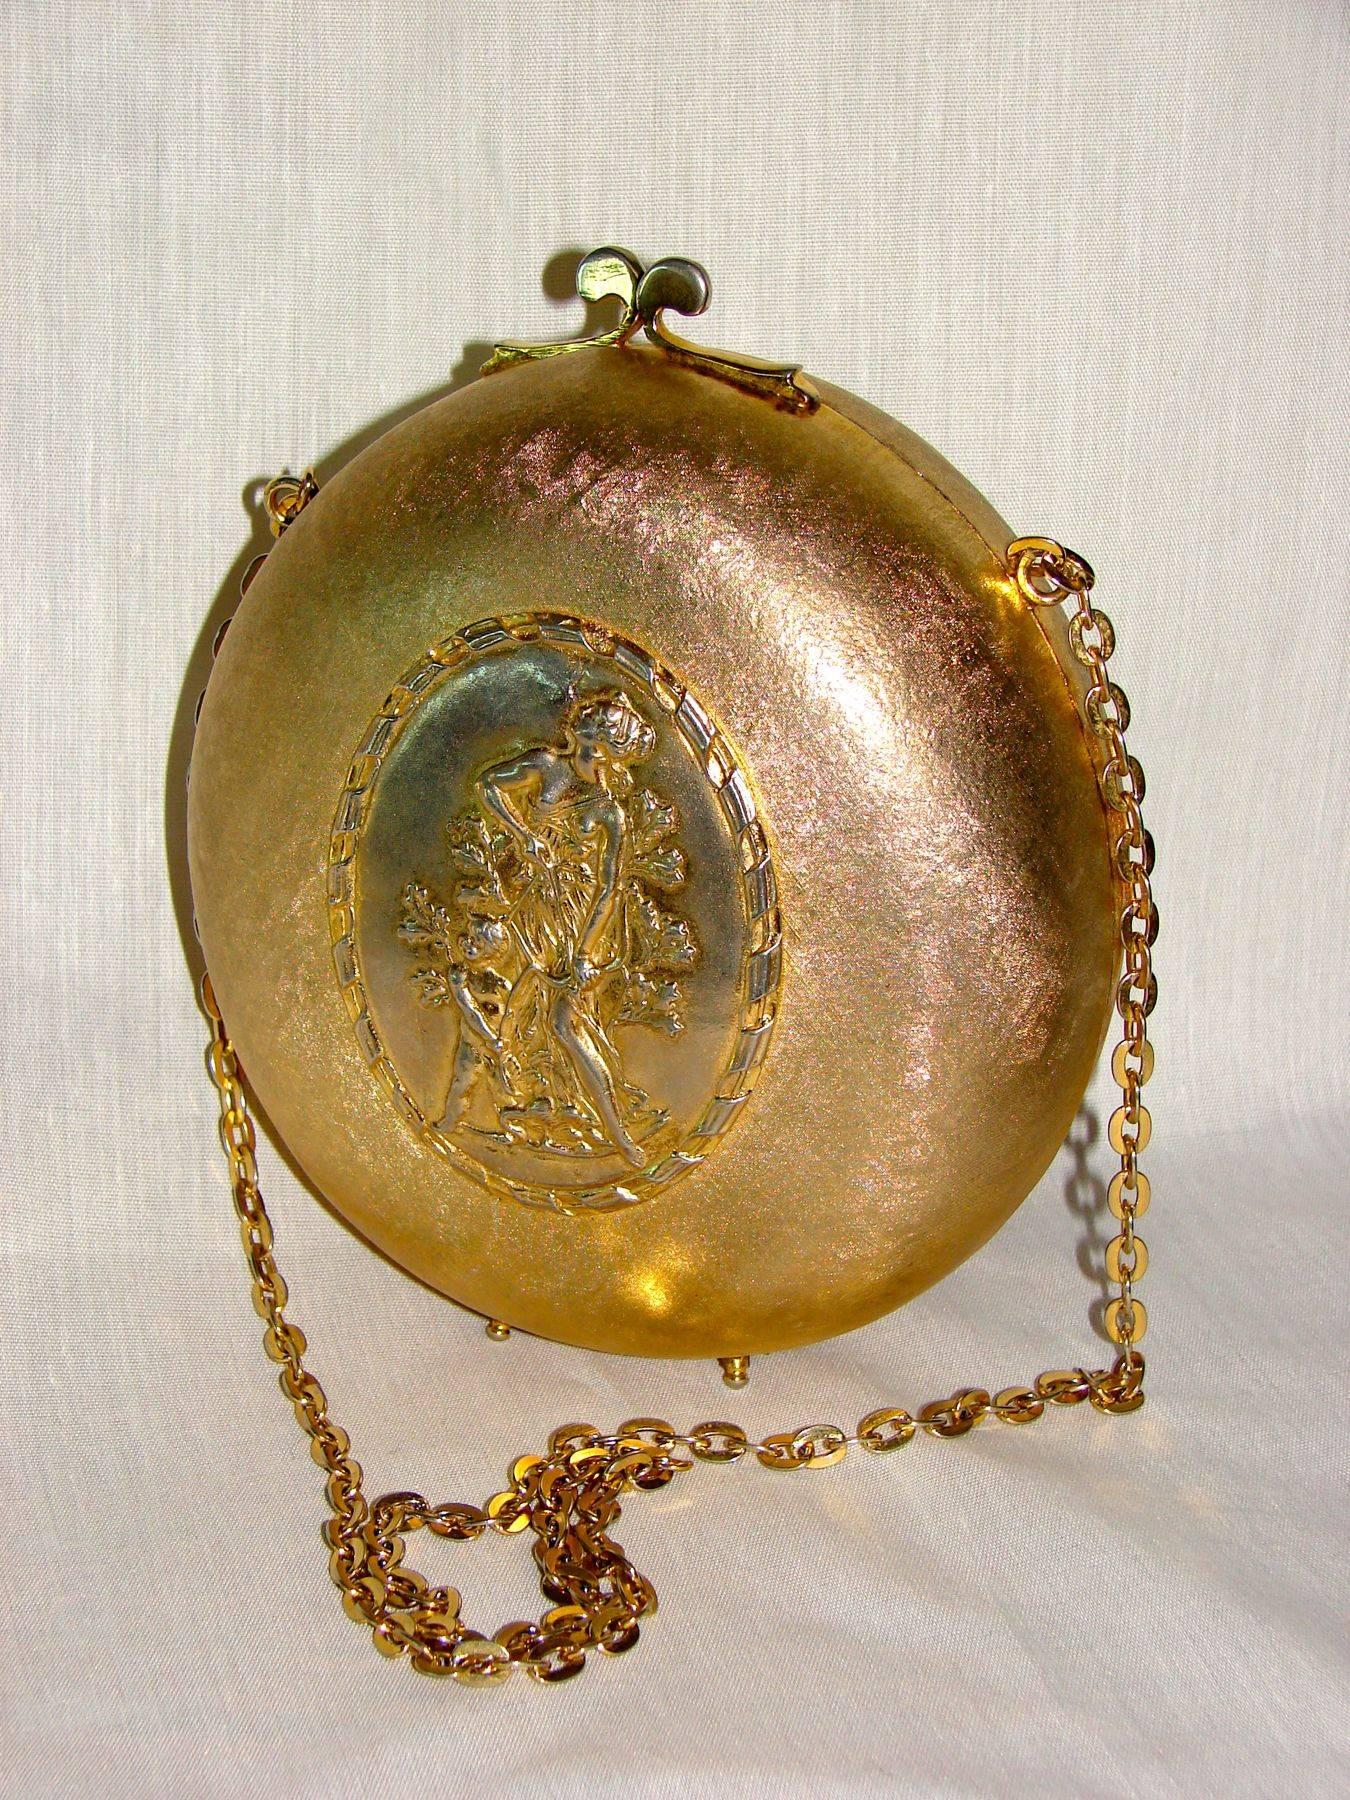 A gilt metal evening bag attributed to Rosenfeld circa 1965.  Made from a gilt exterior, it features a center plate in silver with neoclassical style figures.  Inside is lined in gold velvet and still retains its 'Made in Italy' tag.

In very good